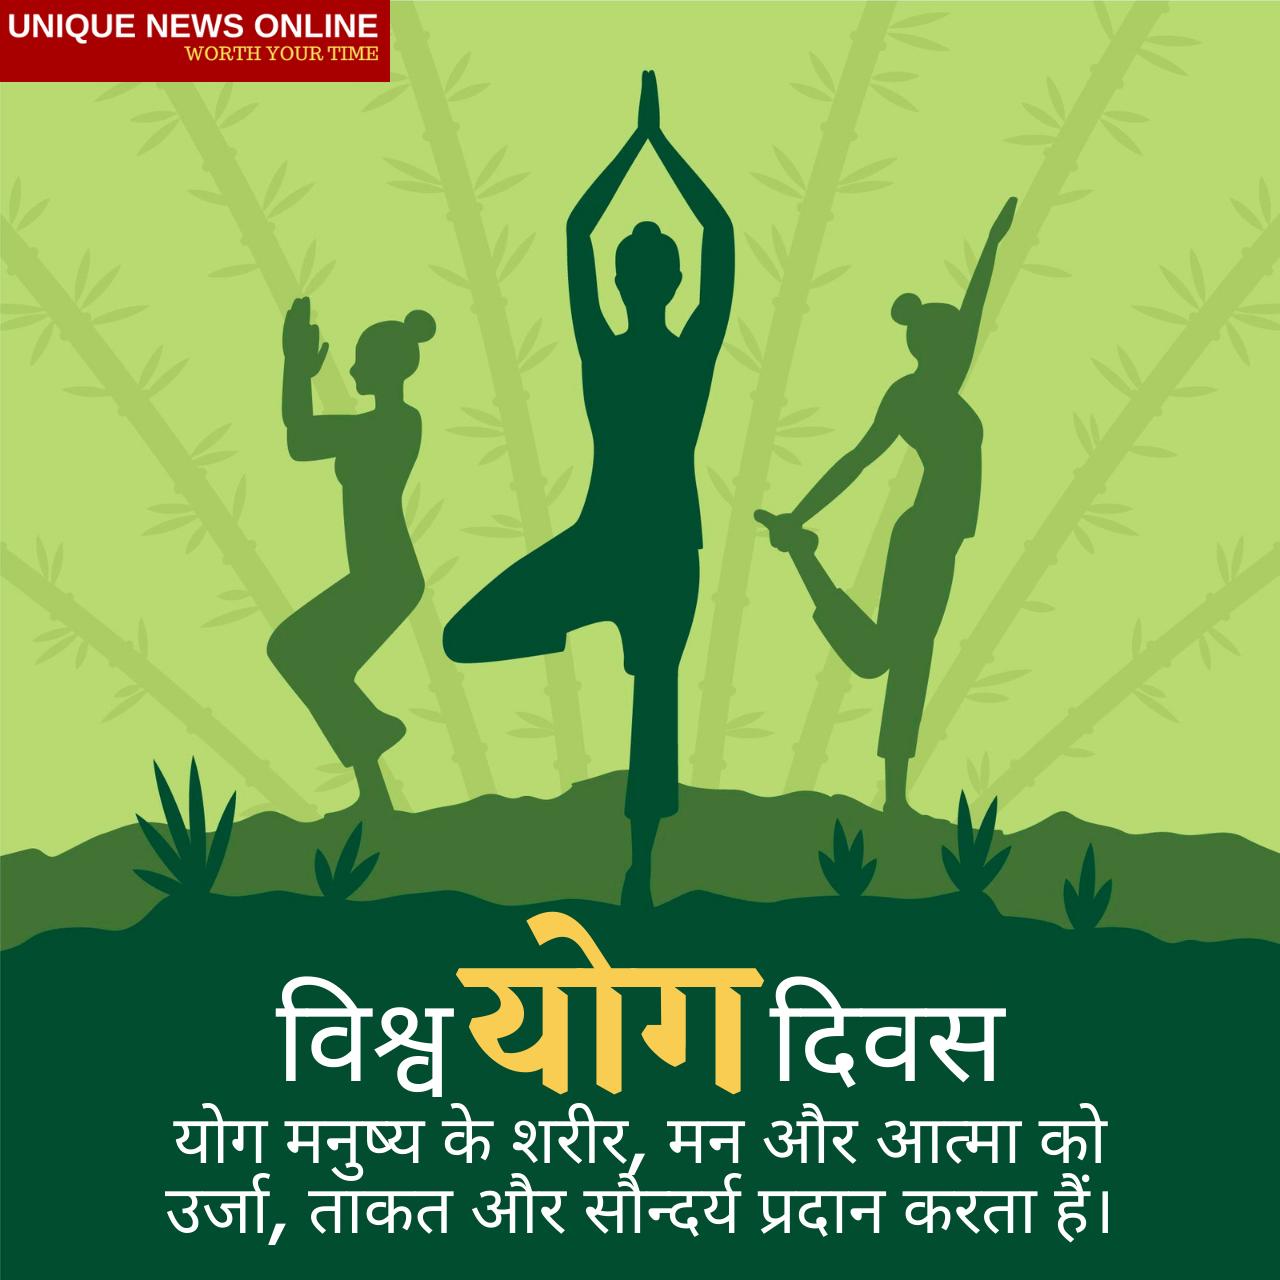 International Yoga Day 2021 Hindi Wishes, Images (Photos), Poster, Quotes, Messages, and Greetings to greet your Loved Ones